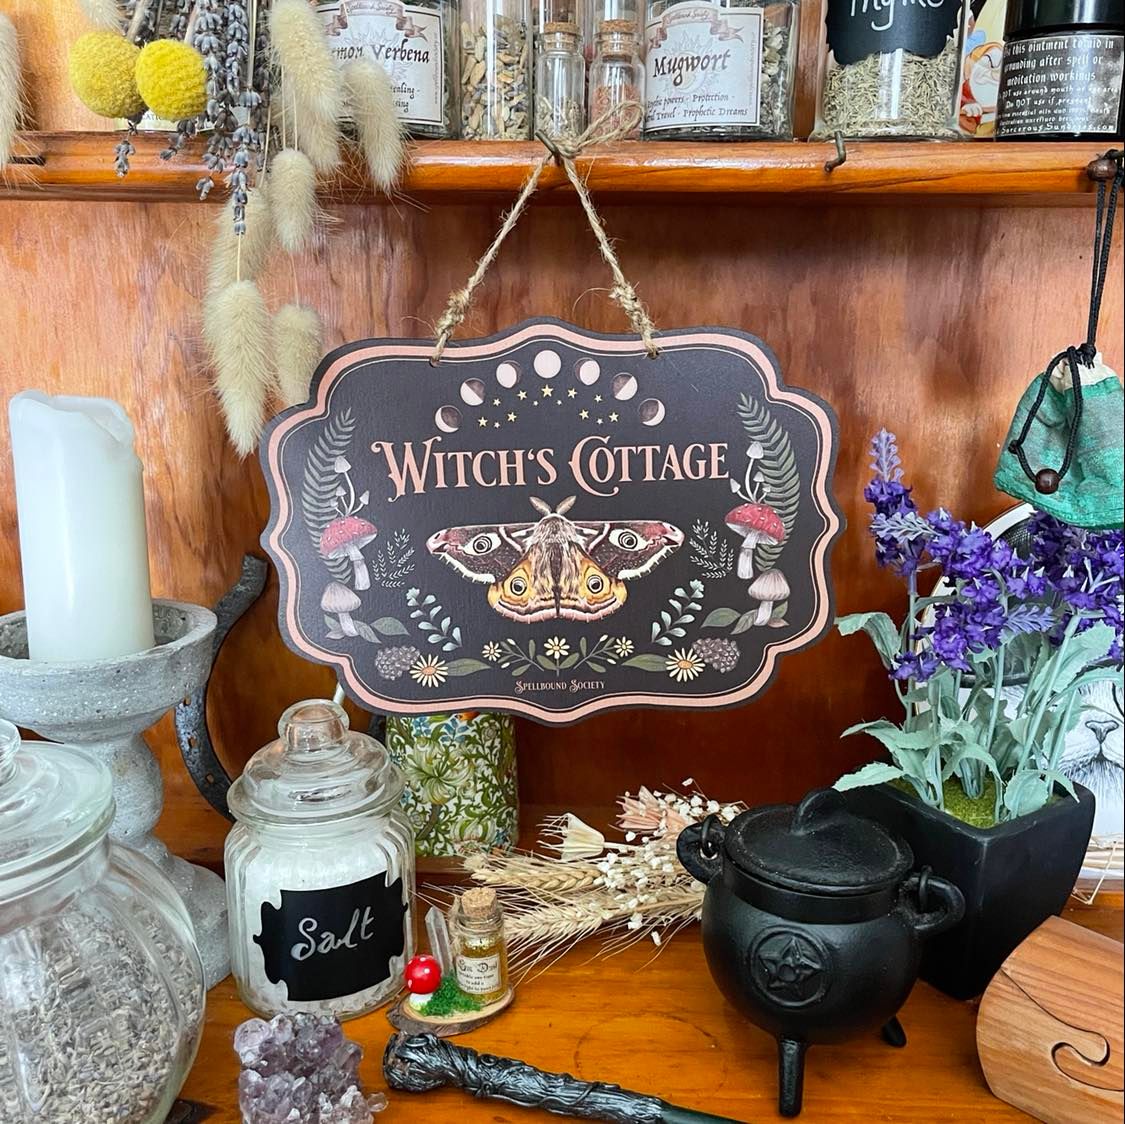 Witch's Cottage Dark Moth Wall Hanging